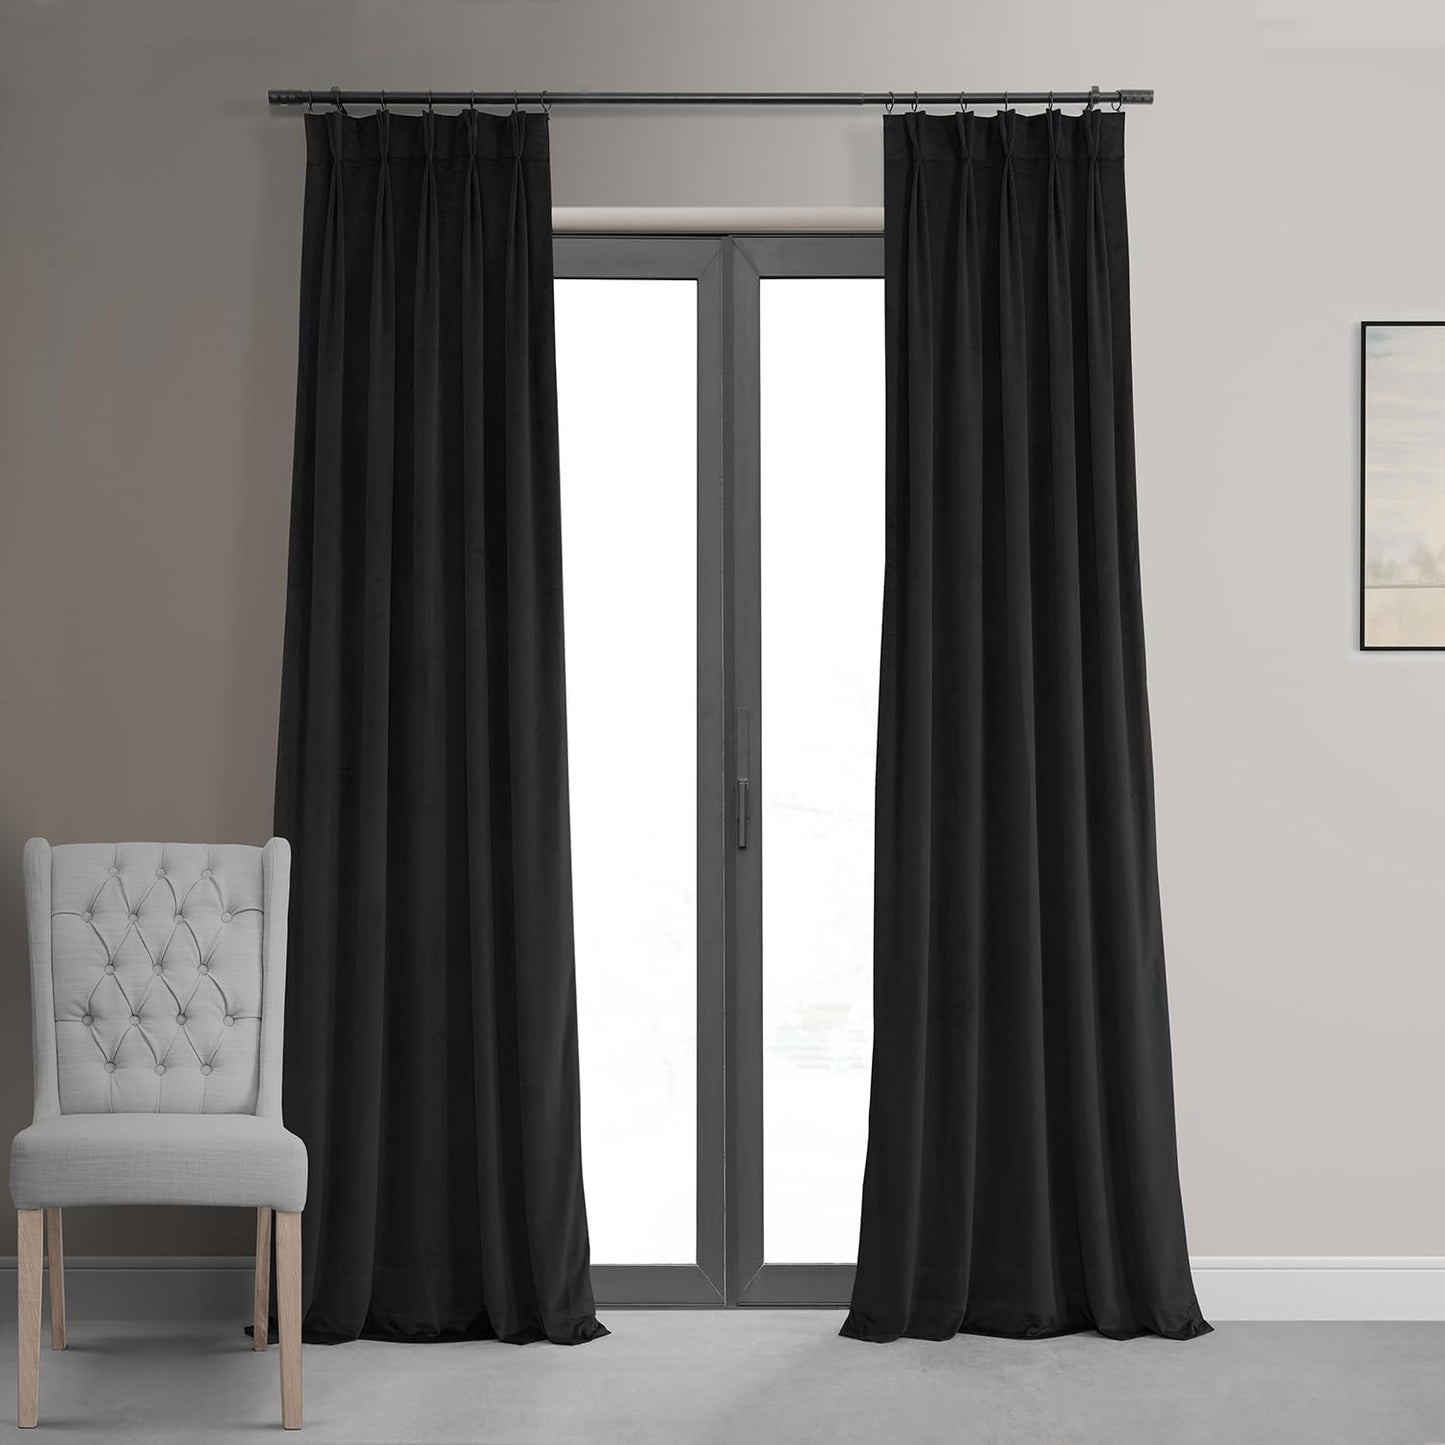 HPD Half Price Drapes Velvet Blackout Curtains/Drapes - 96 Inches Long 1 Panel Blackout Curtain Signature Pleated for Living Room & Bedroom - 25W X 96L, Porcelain White  Exclusive Fabrics & Furnishings Warm Black 25W X 108L 